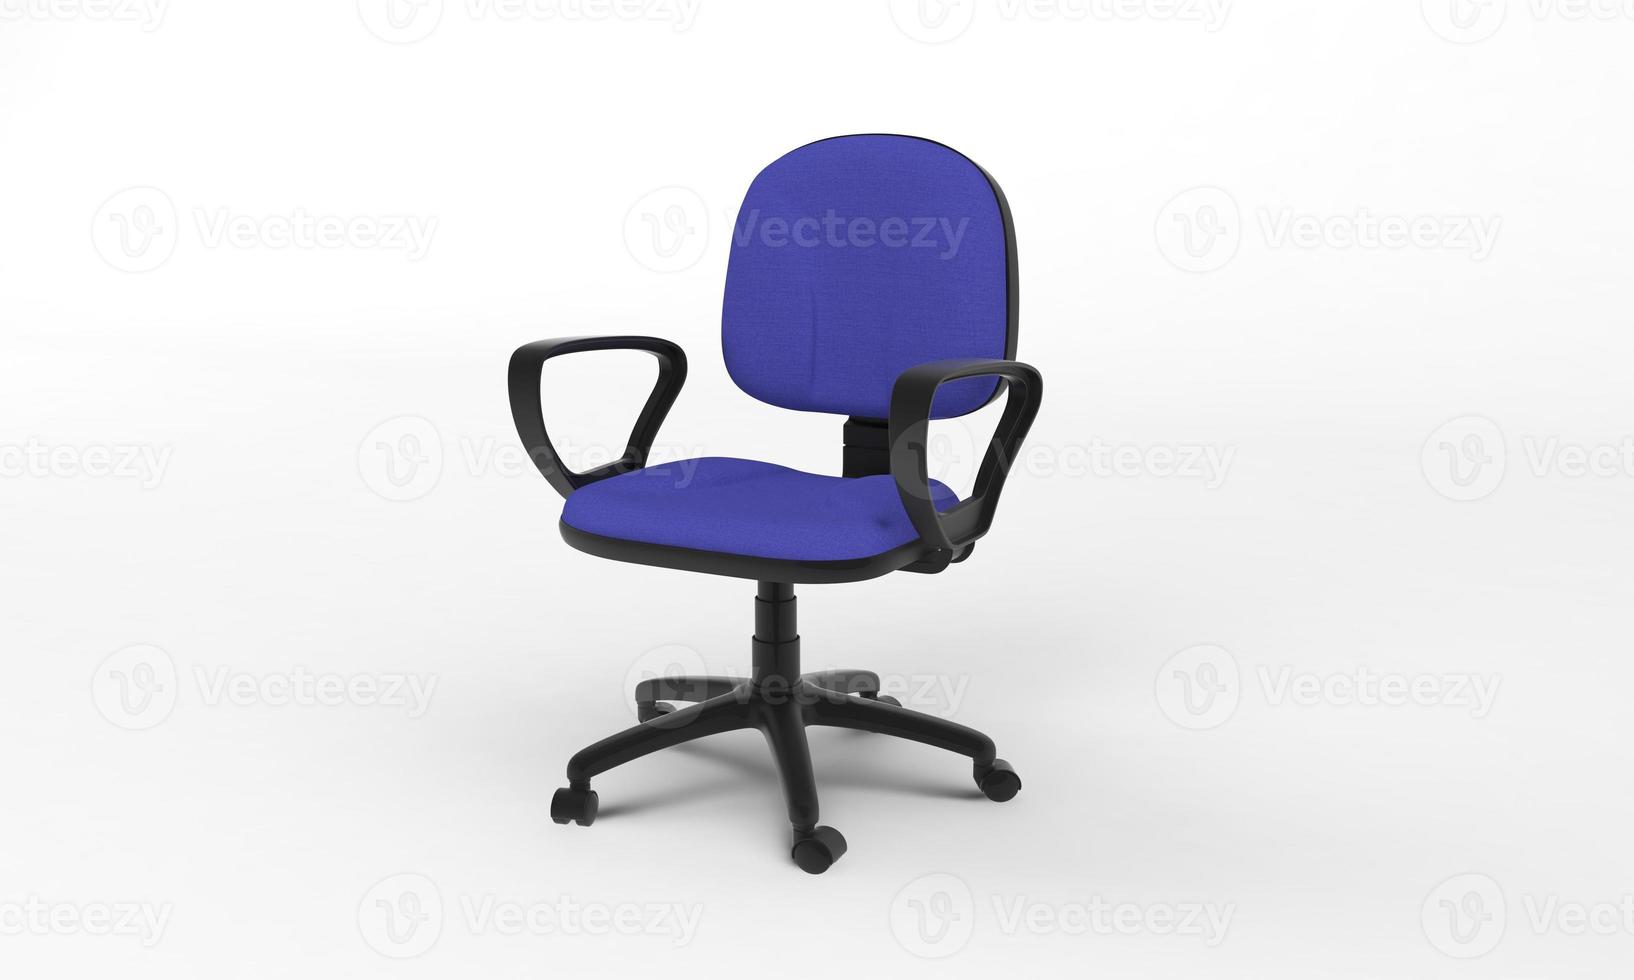 Chair Side View furniture 3D Rendering photo